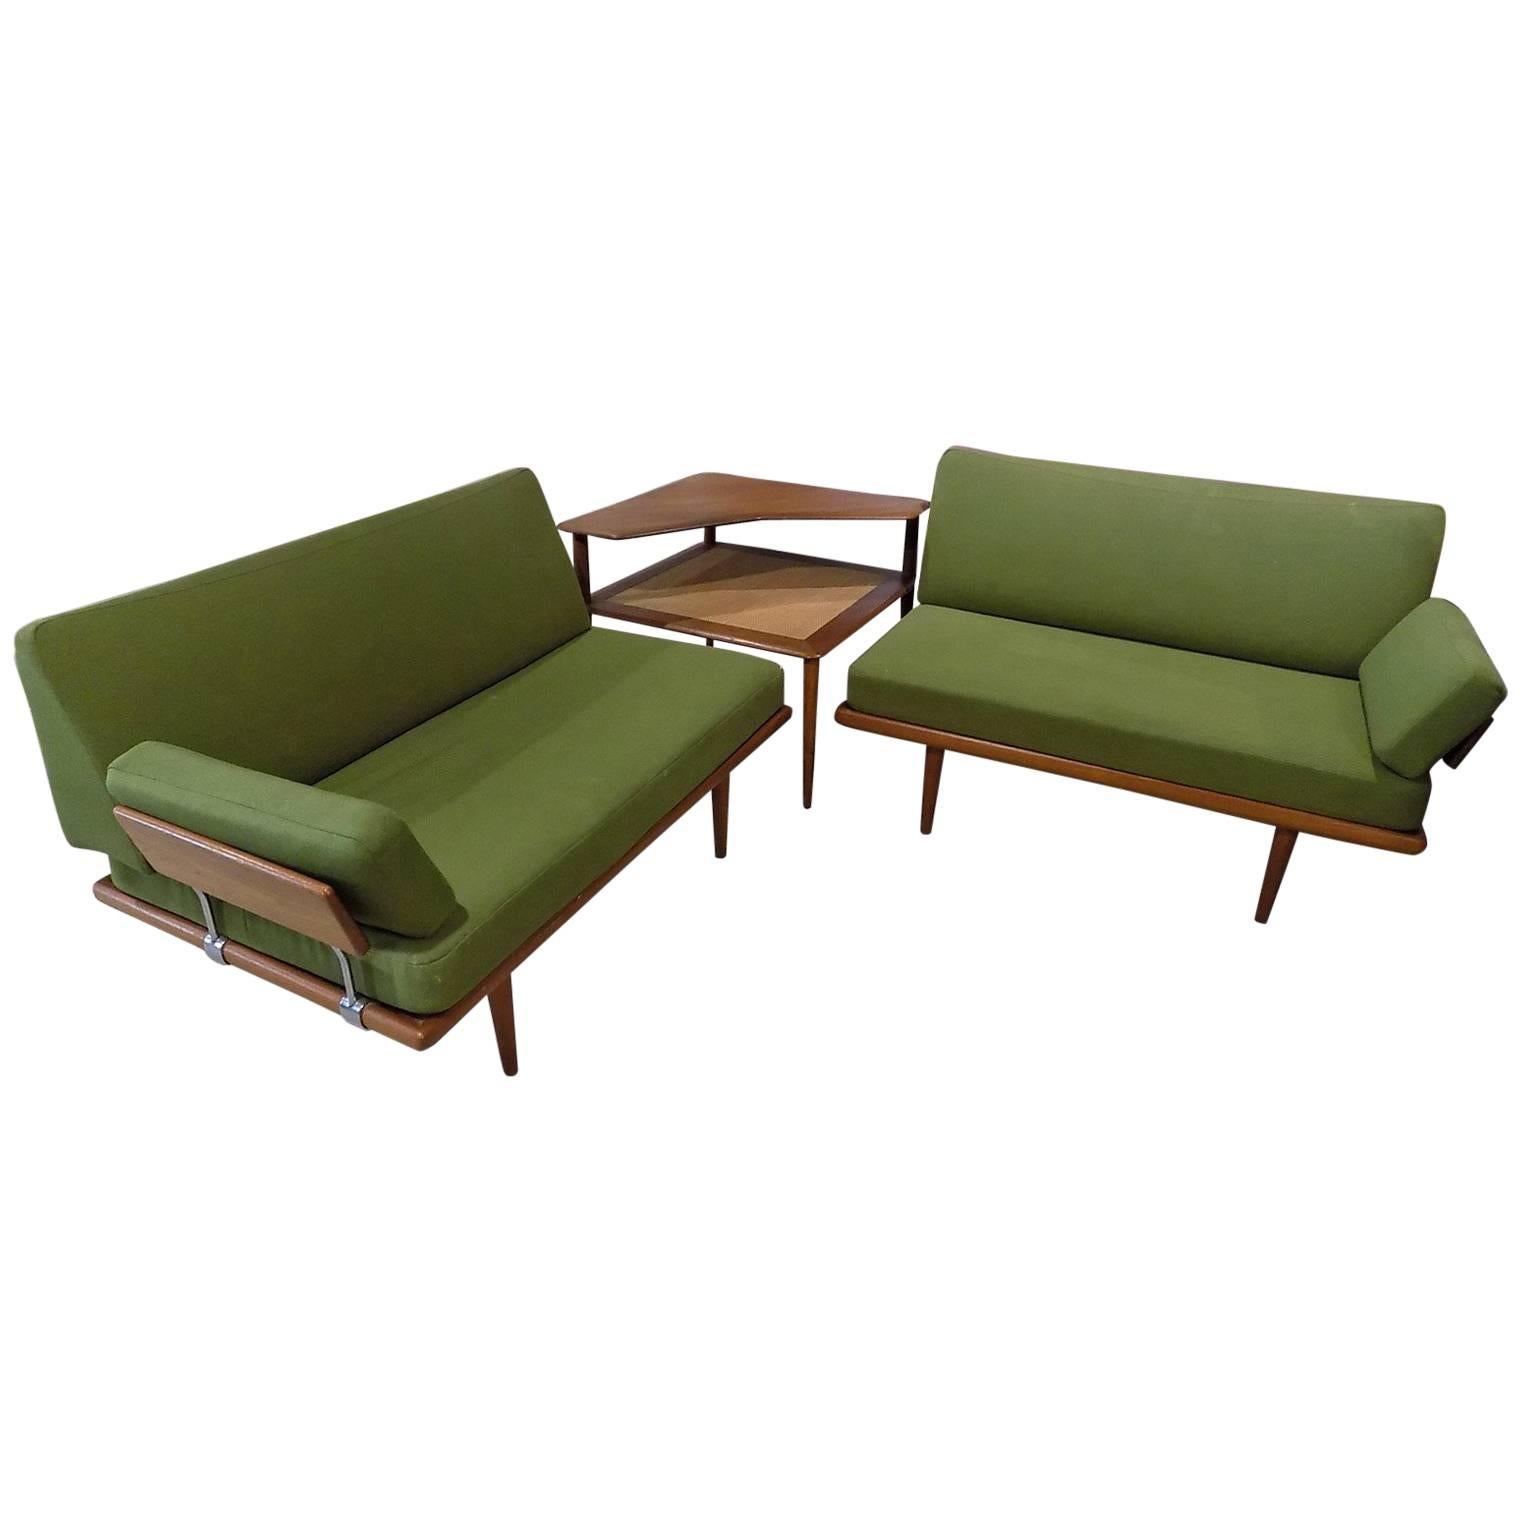 Peter Hvidt Set of Two Sofas and Coffee Table, circa 1960